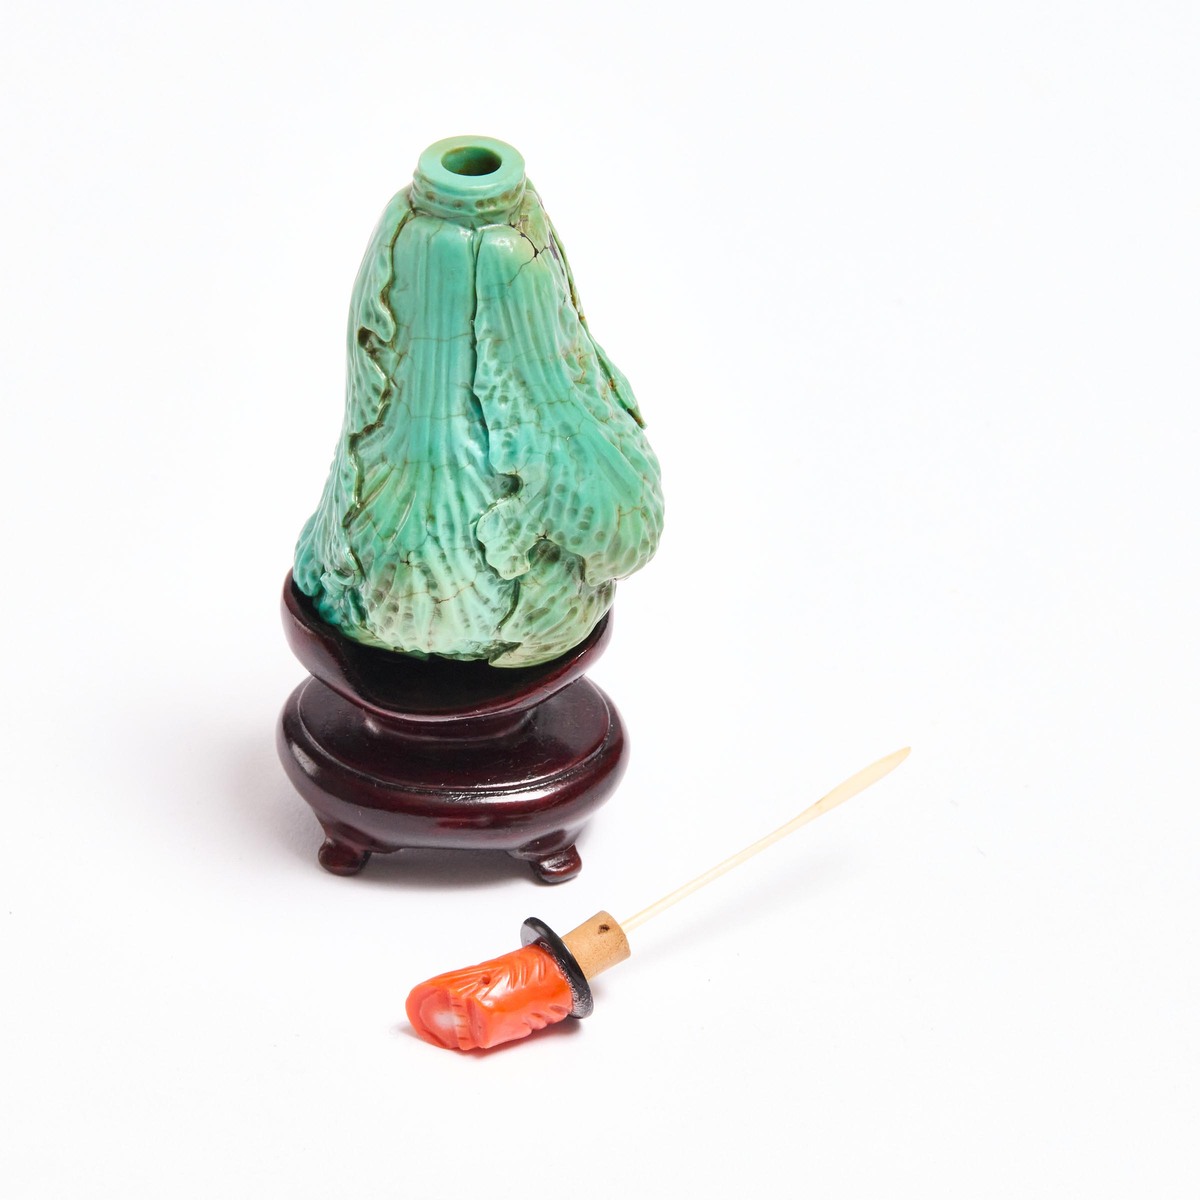 A Carved Turquoise Cabbage-Form Snuff Bottle, 19th Century, 清 十九世纪 绿松石雕白菜型烟壶, length 3.1 in — 7.8 cm - Image 4 of 5